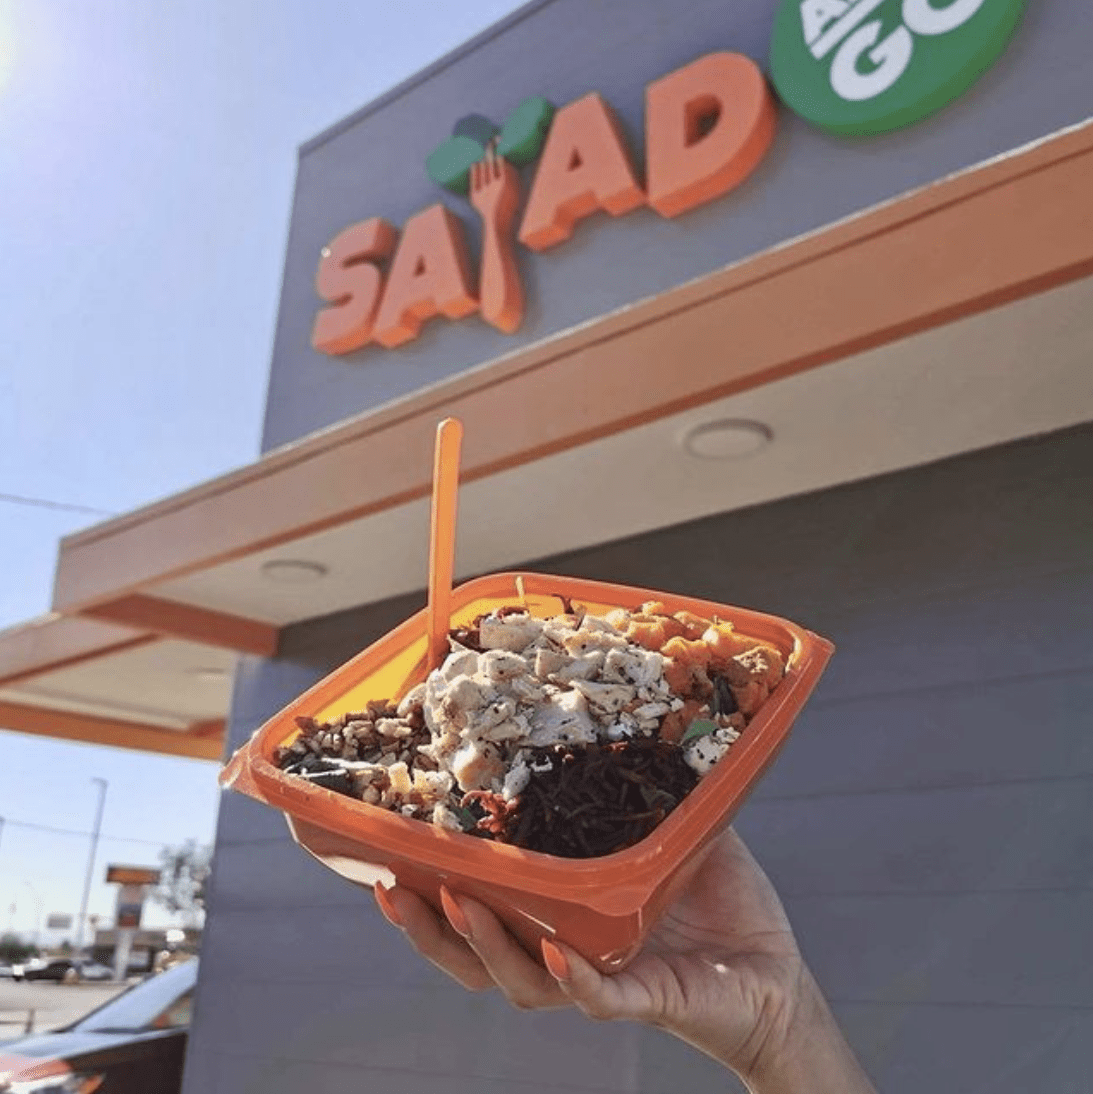 Salad and Go receipt swap: Bring any meal receipt for free salad